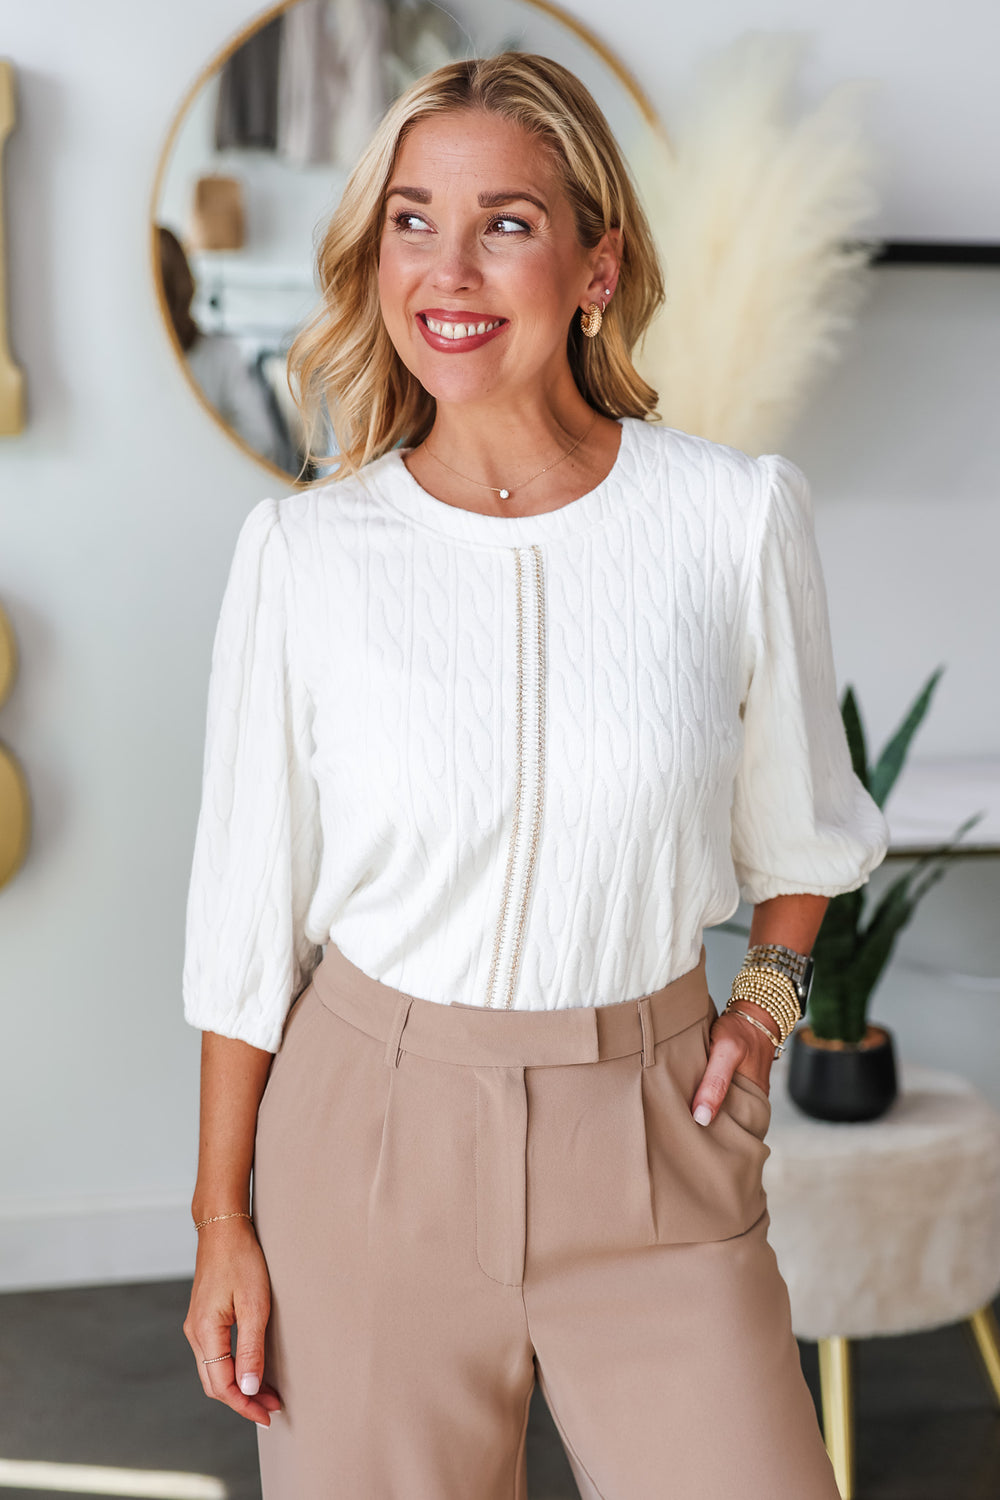 A blonde woman standing in a shop wearing a white cable knit detail top with gold center seam and tan dress pants.